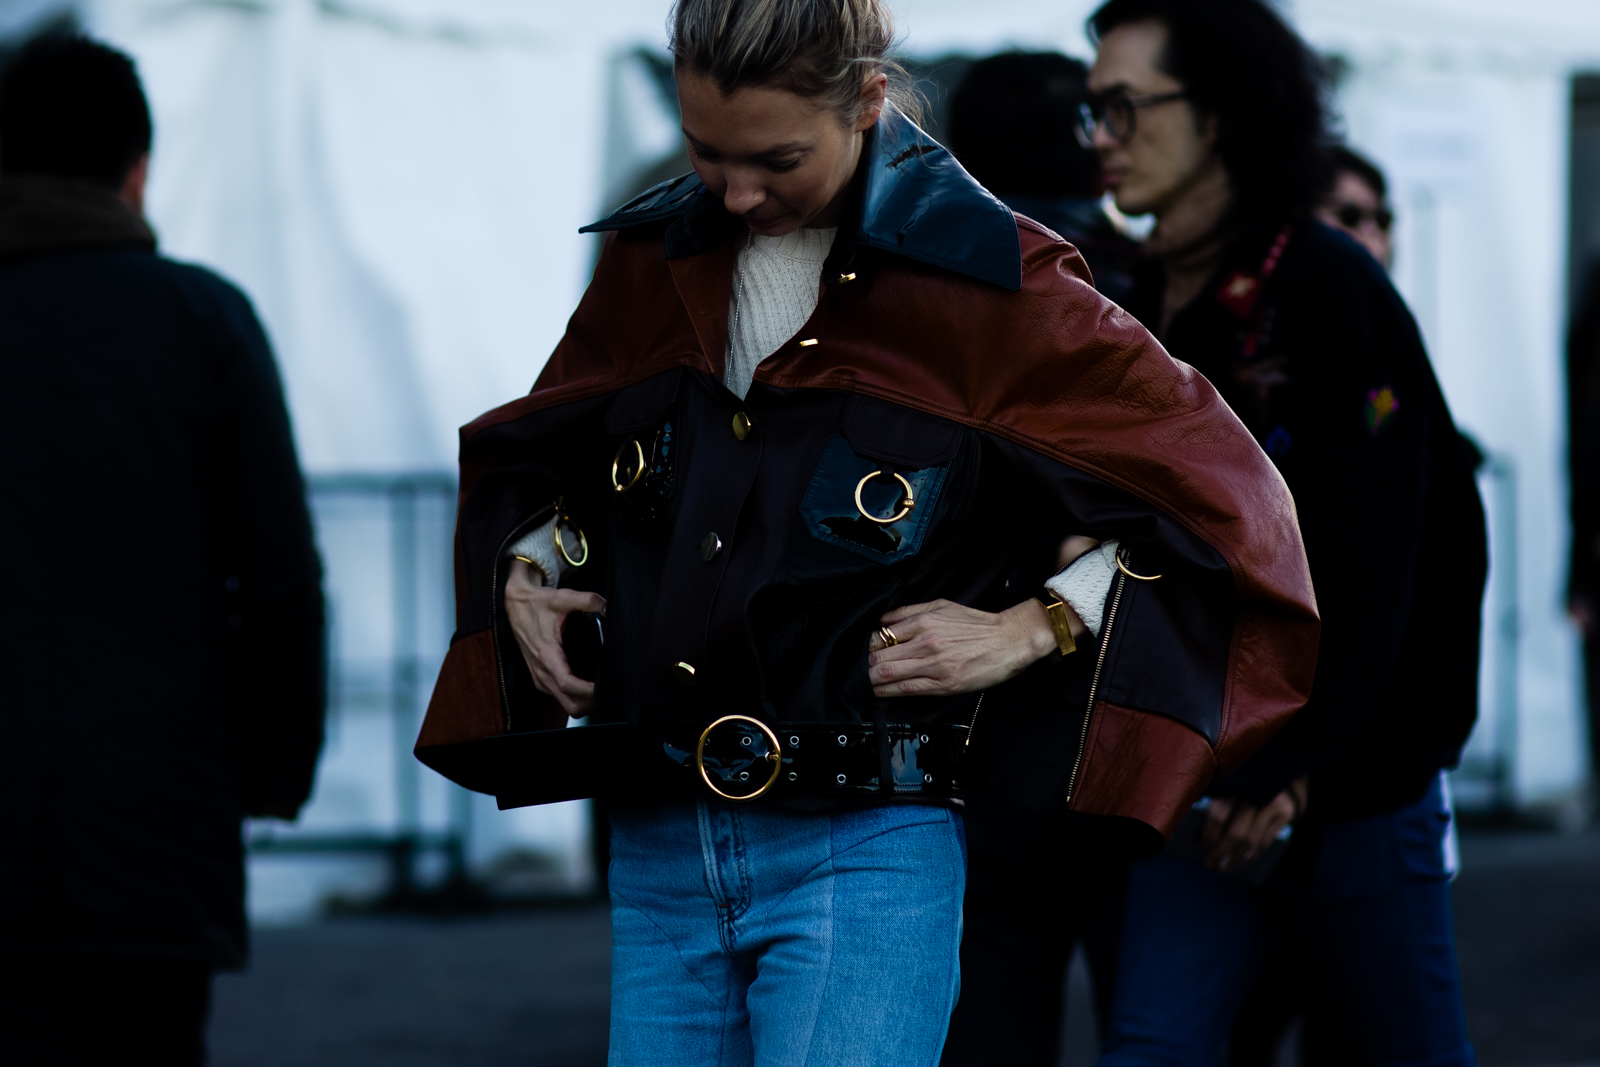 Roberta Benteler wearing a Thomas Tait leather jacket and Vetements jeans before the Courreges Fall 2016 fashion show in Paris, France